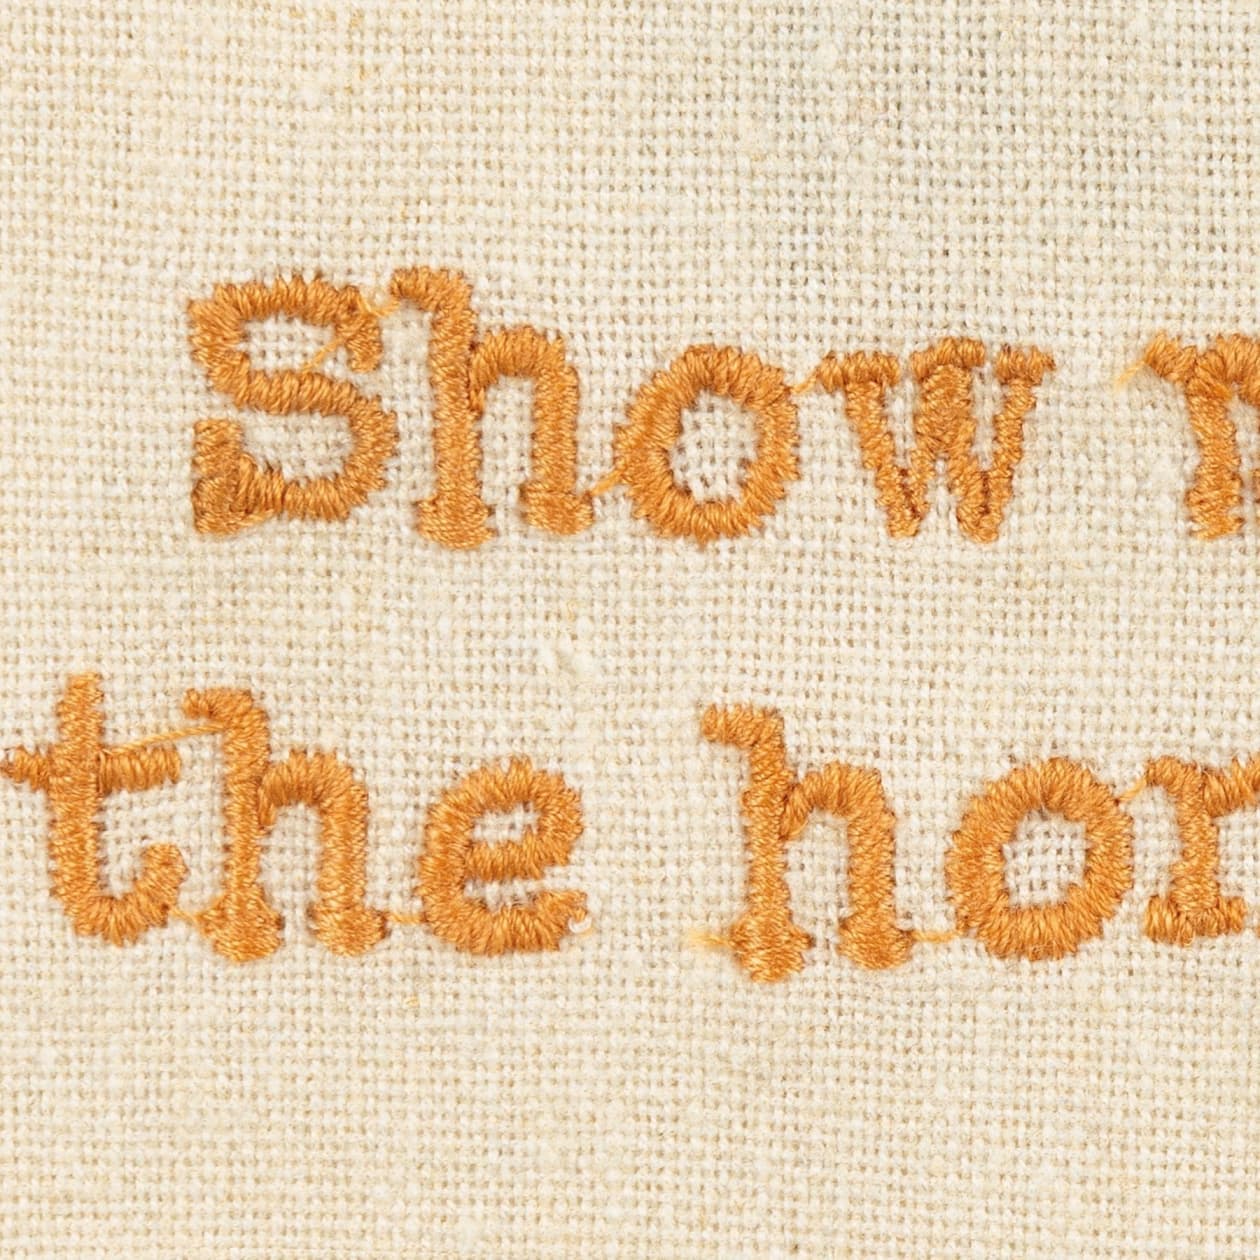 Show Me The Honey Honeybee Dish Cloth Towel | Cotten Linen Cotton and Linen | Embroidered Text | 18" x 28"